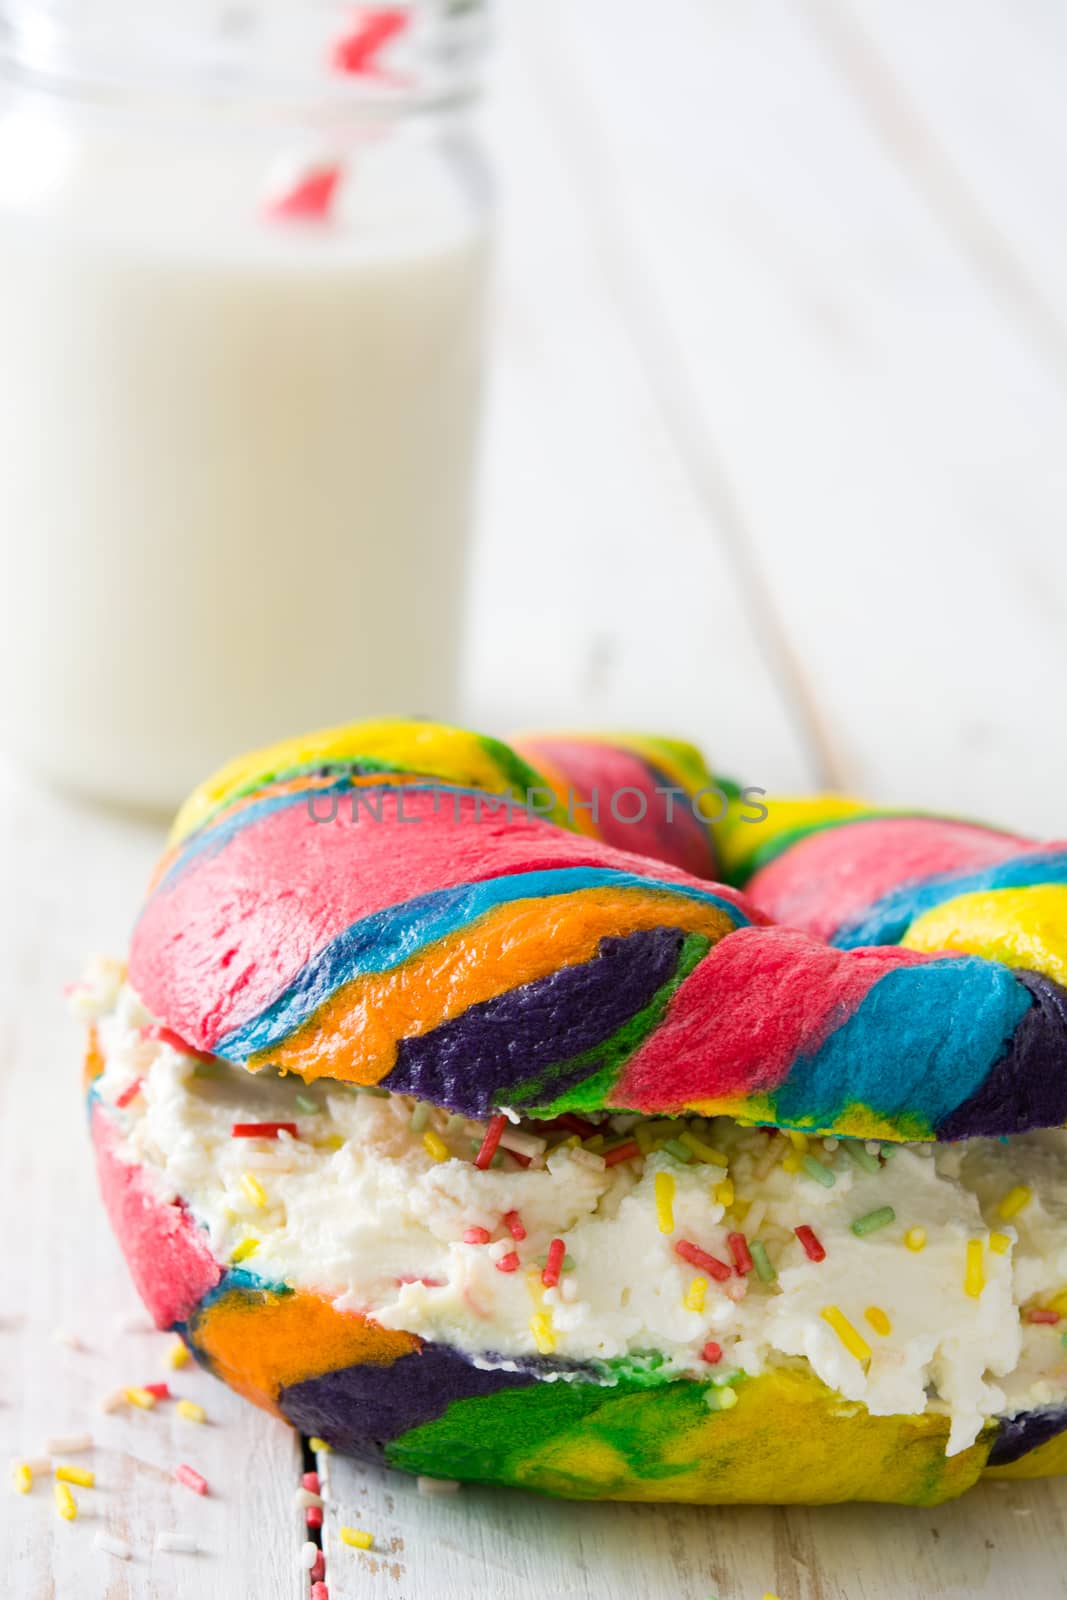 Colorful bagel with cheese and sprinkles by chandlervid85